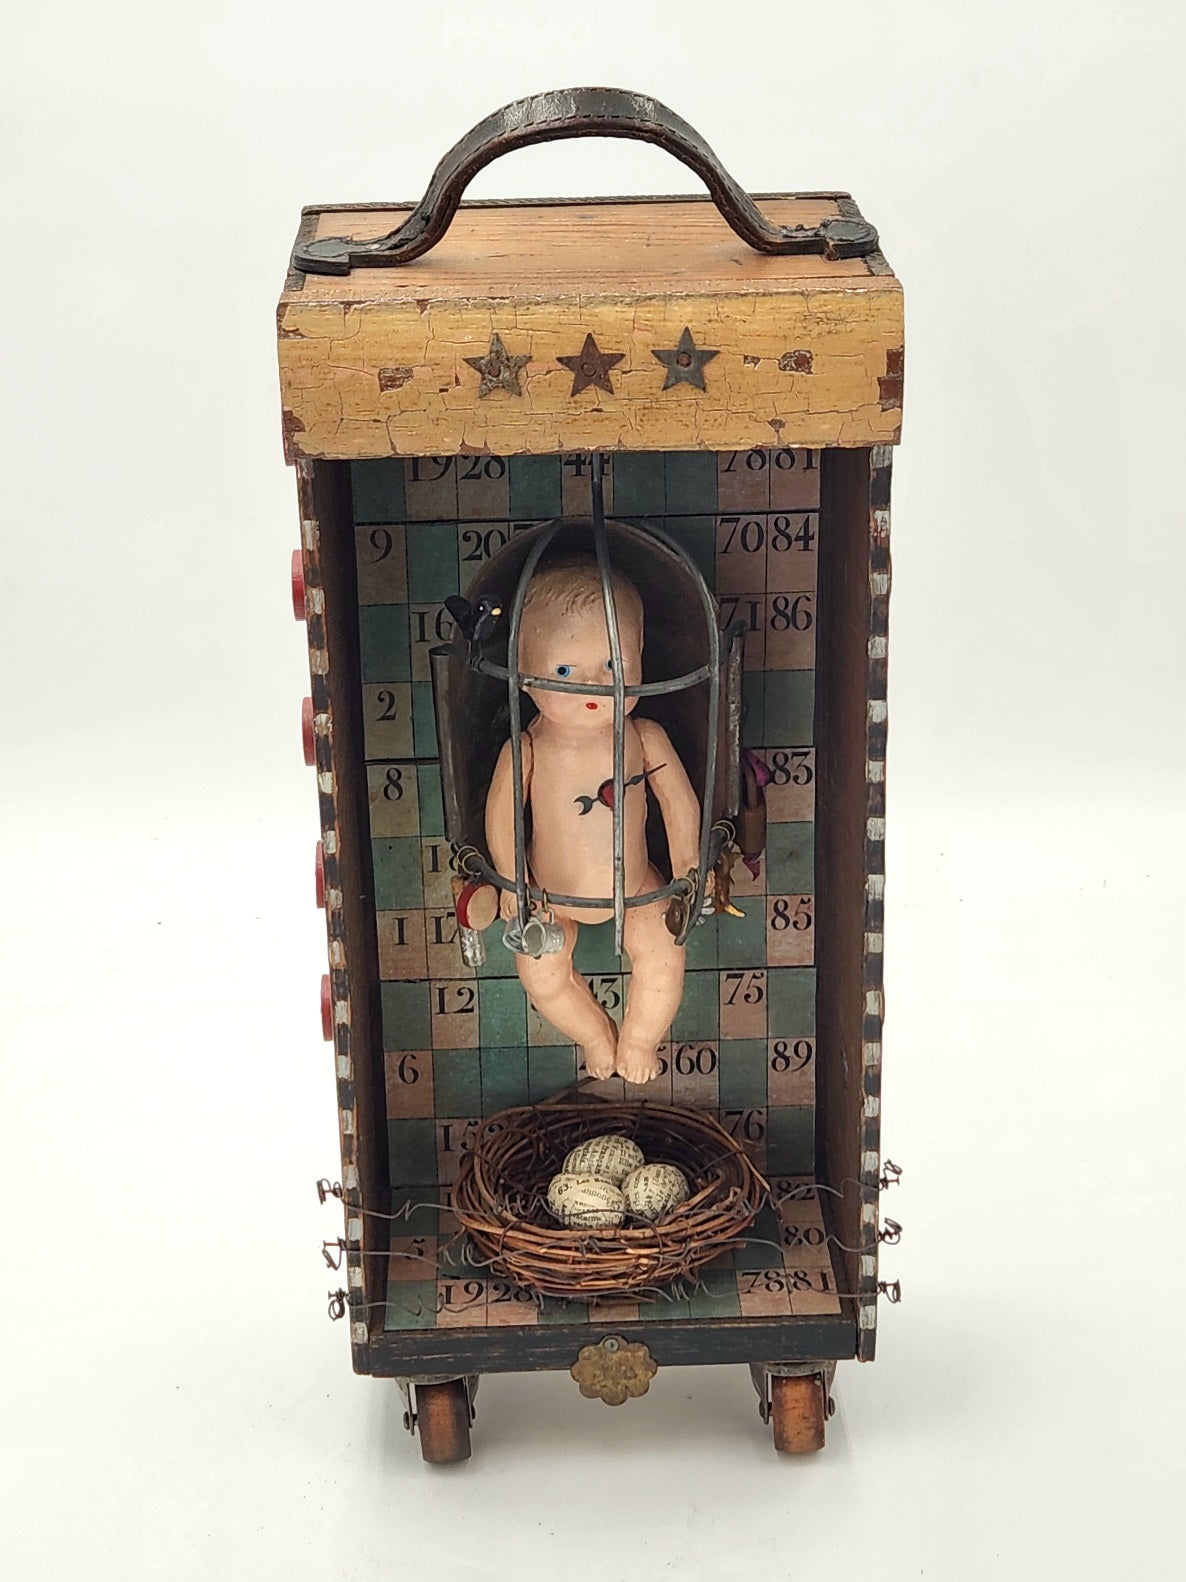 Baby in a Birdcage Assemblage Art